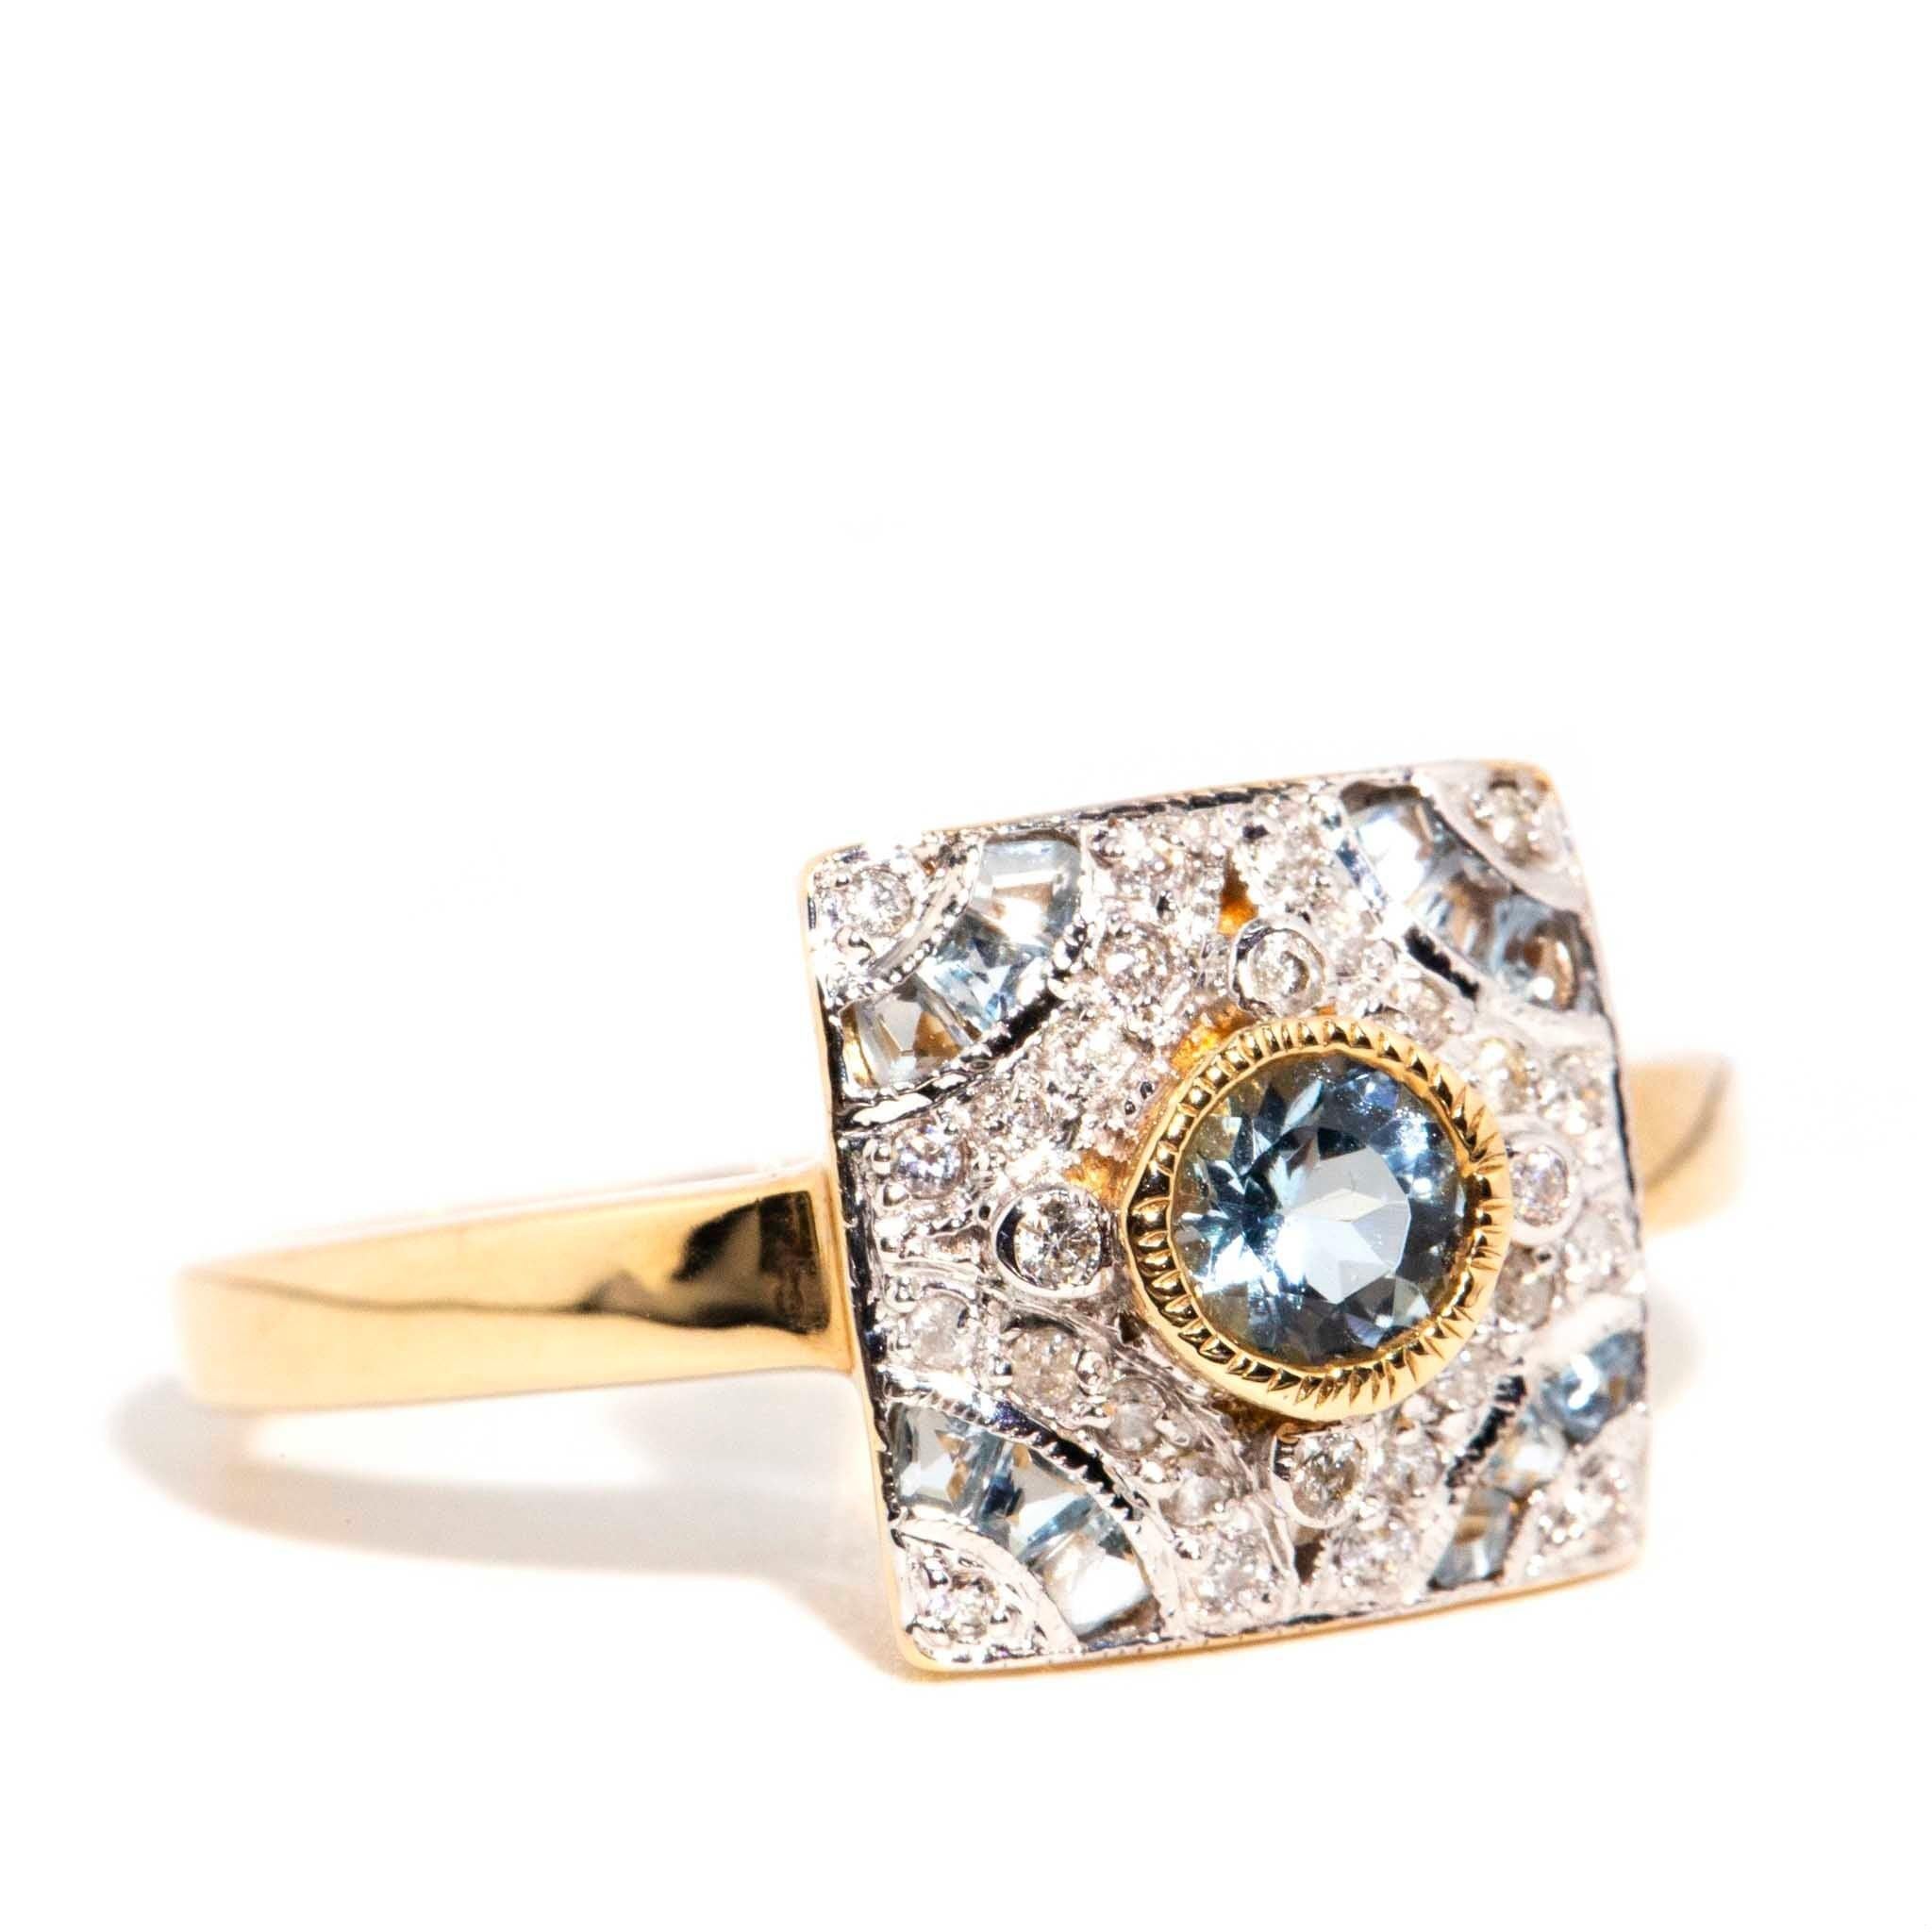 Vintage Inspired Bright Light Blue Aquamarine & Diamond Ring 9 Carat Yellow Gold In New Condition For Sale In Hamilton, AU